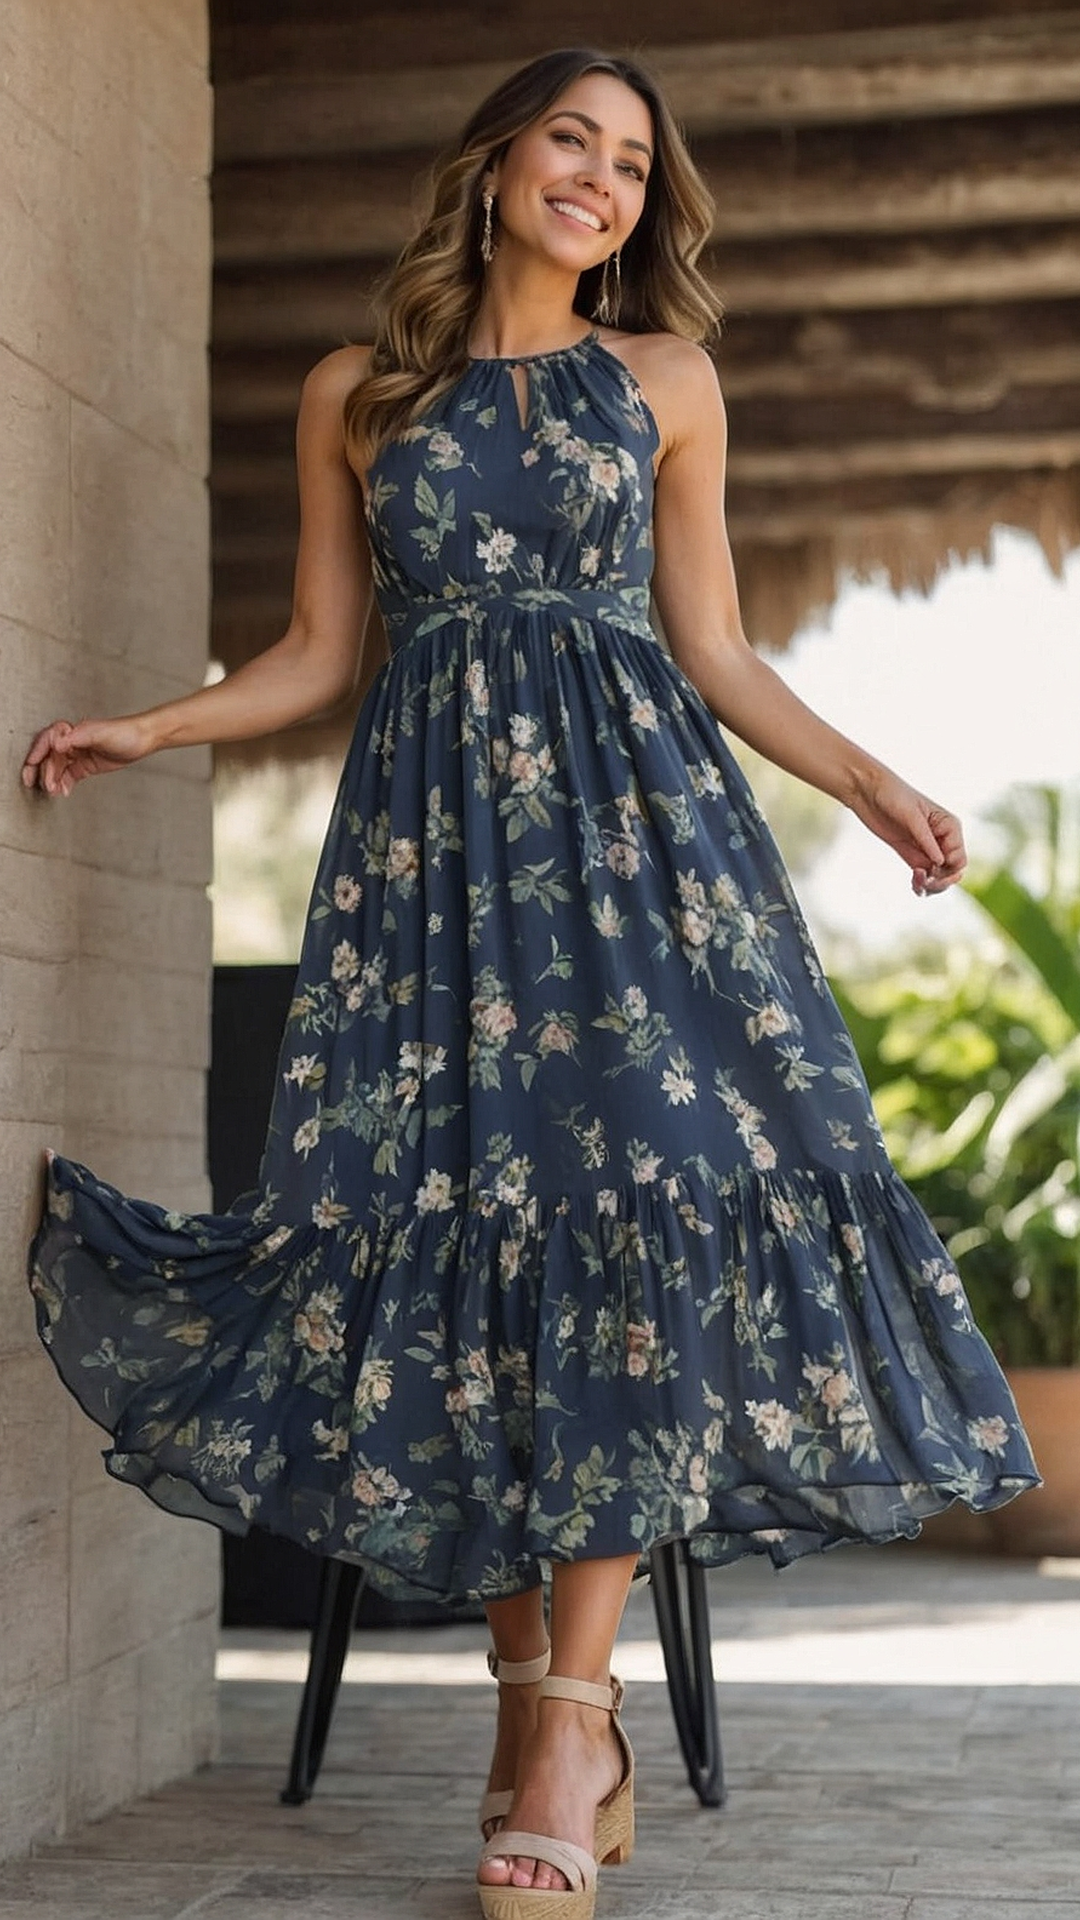 Bloom Where You Stand: Floral Maxi Dress Suggestions